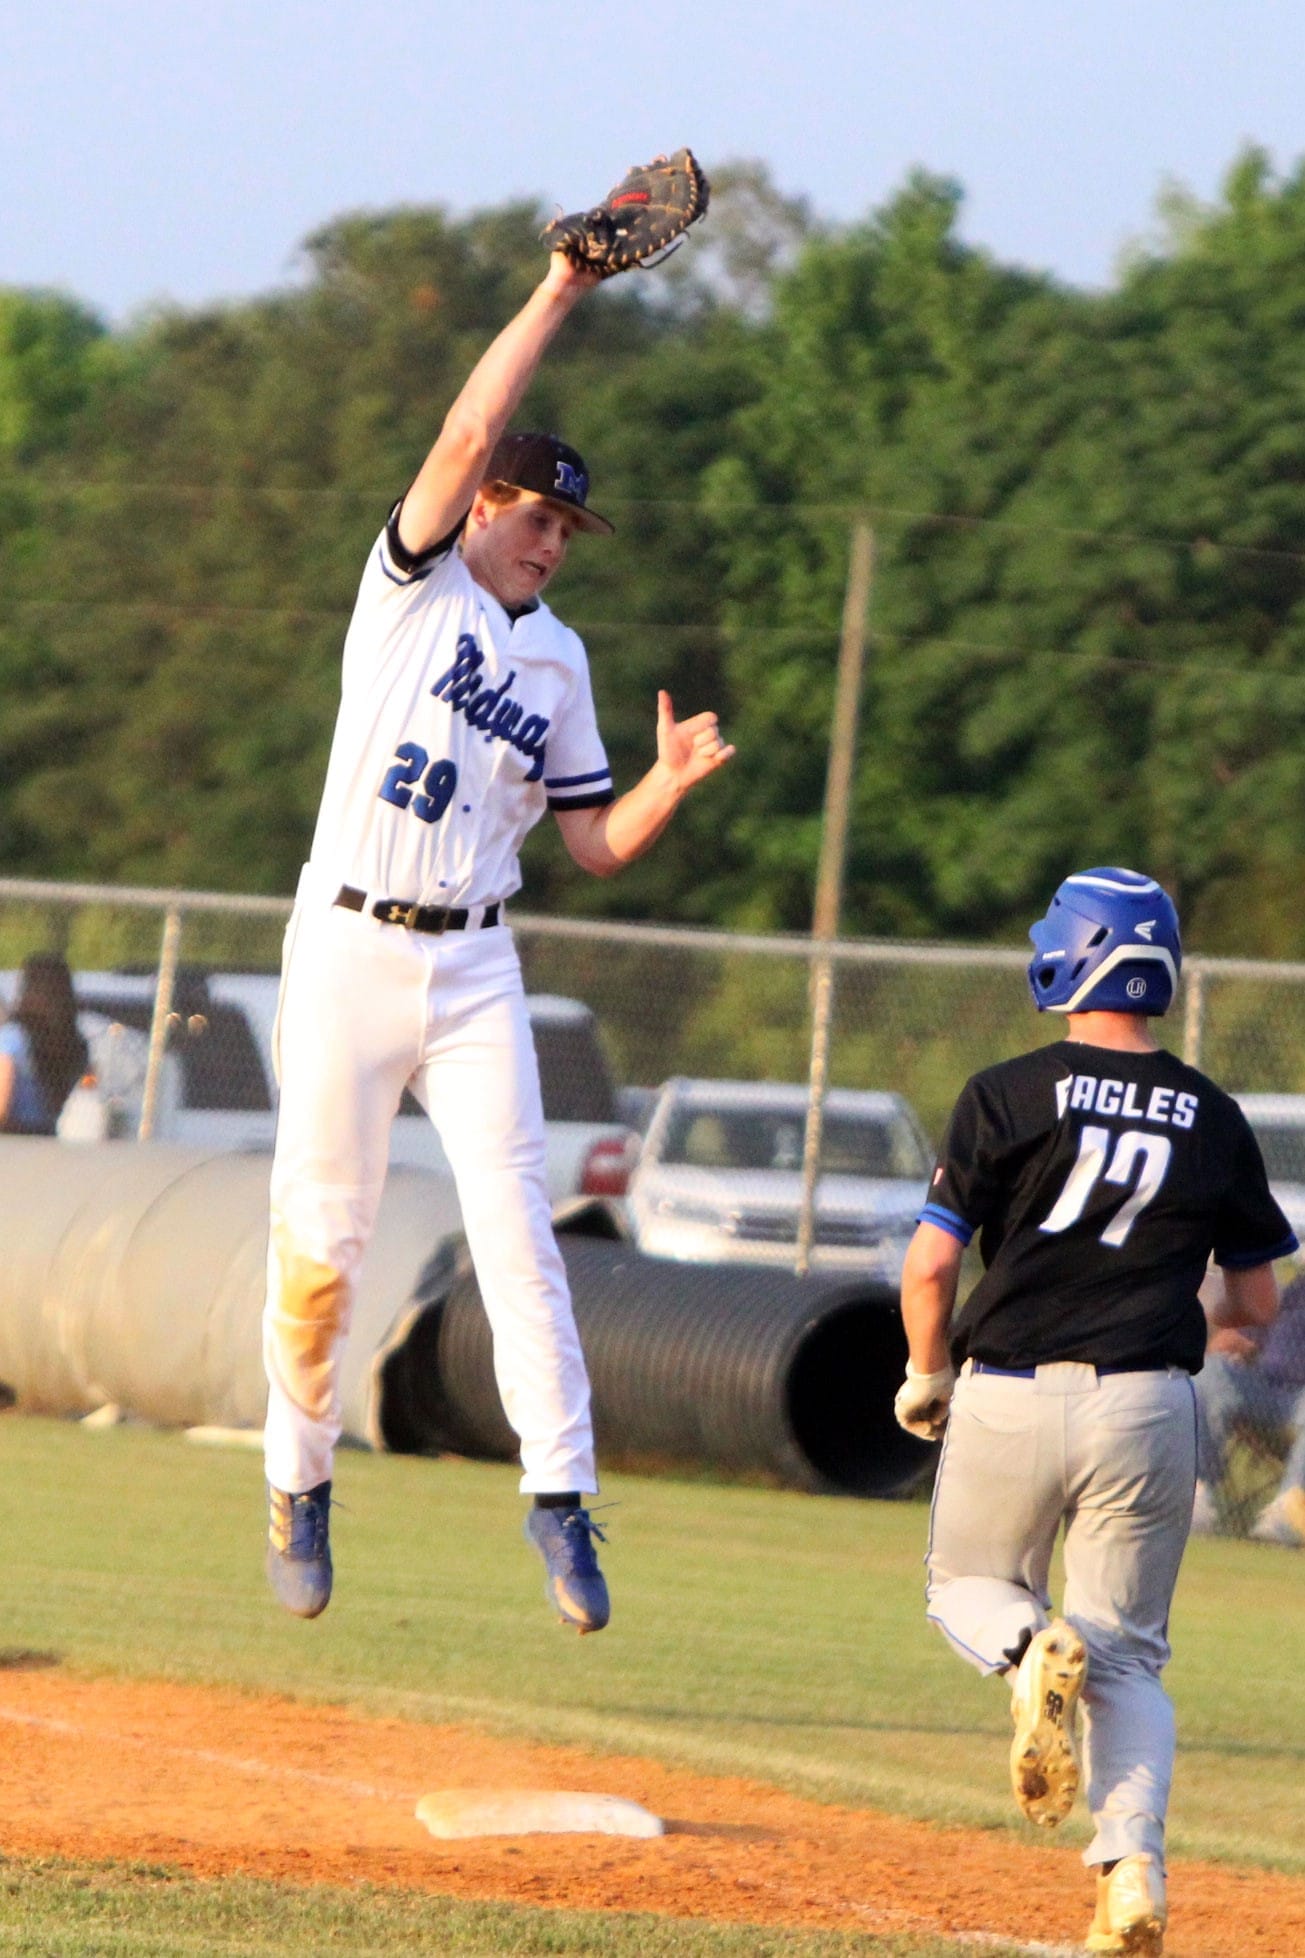 Raiders take second-round wins at home in baseball, softball